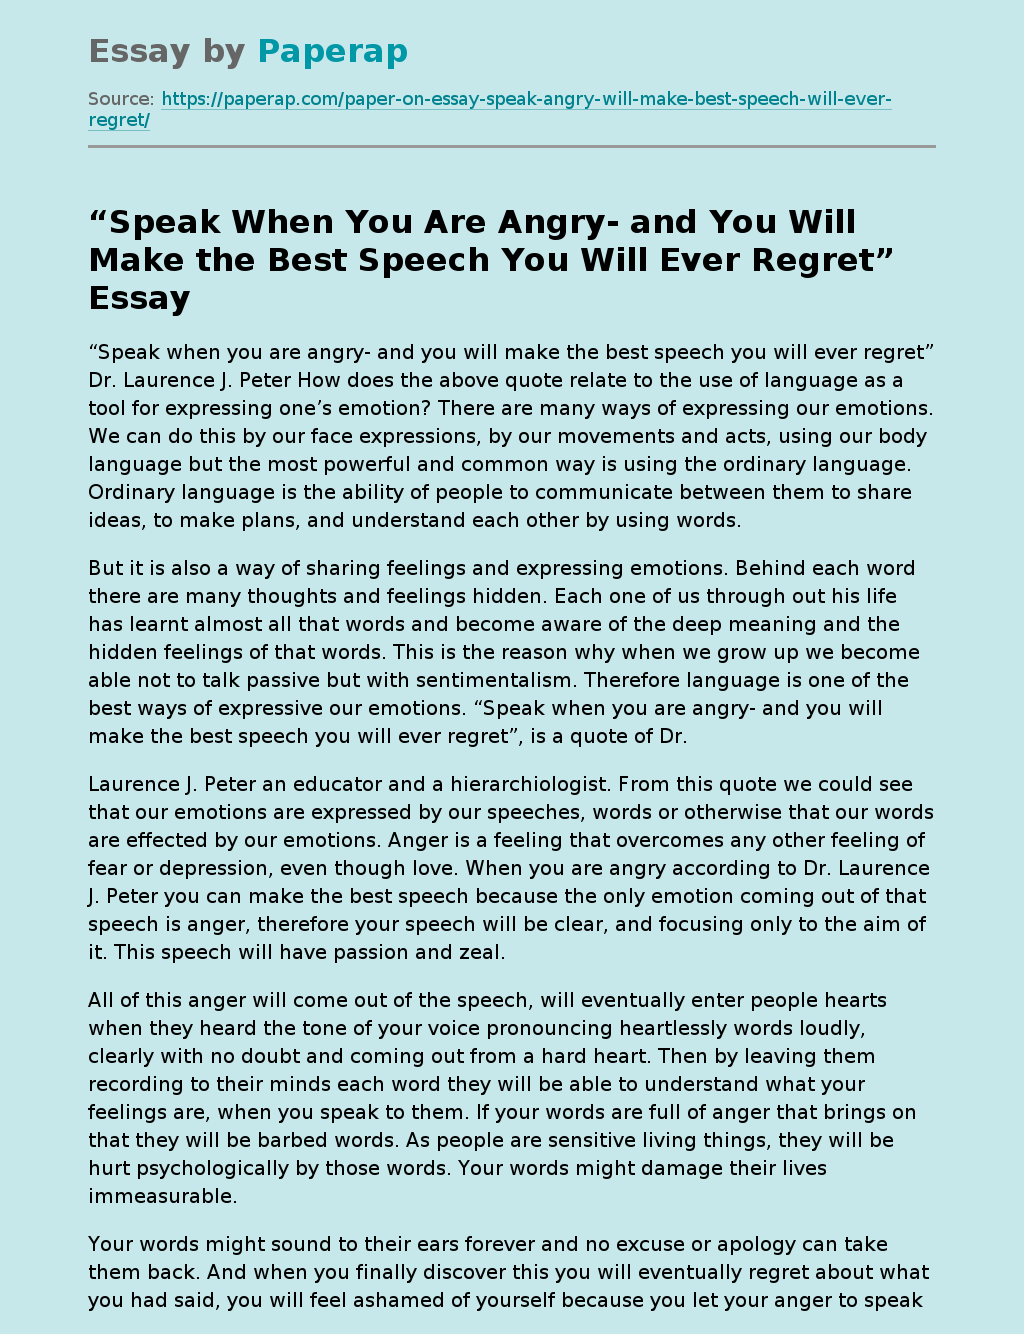 “Speak When You Are Angry- and You Will Make the Best Speech You Will Ever Regret”